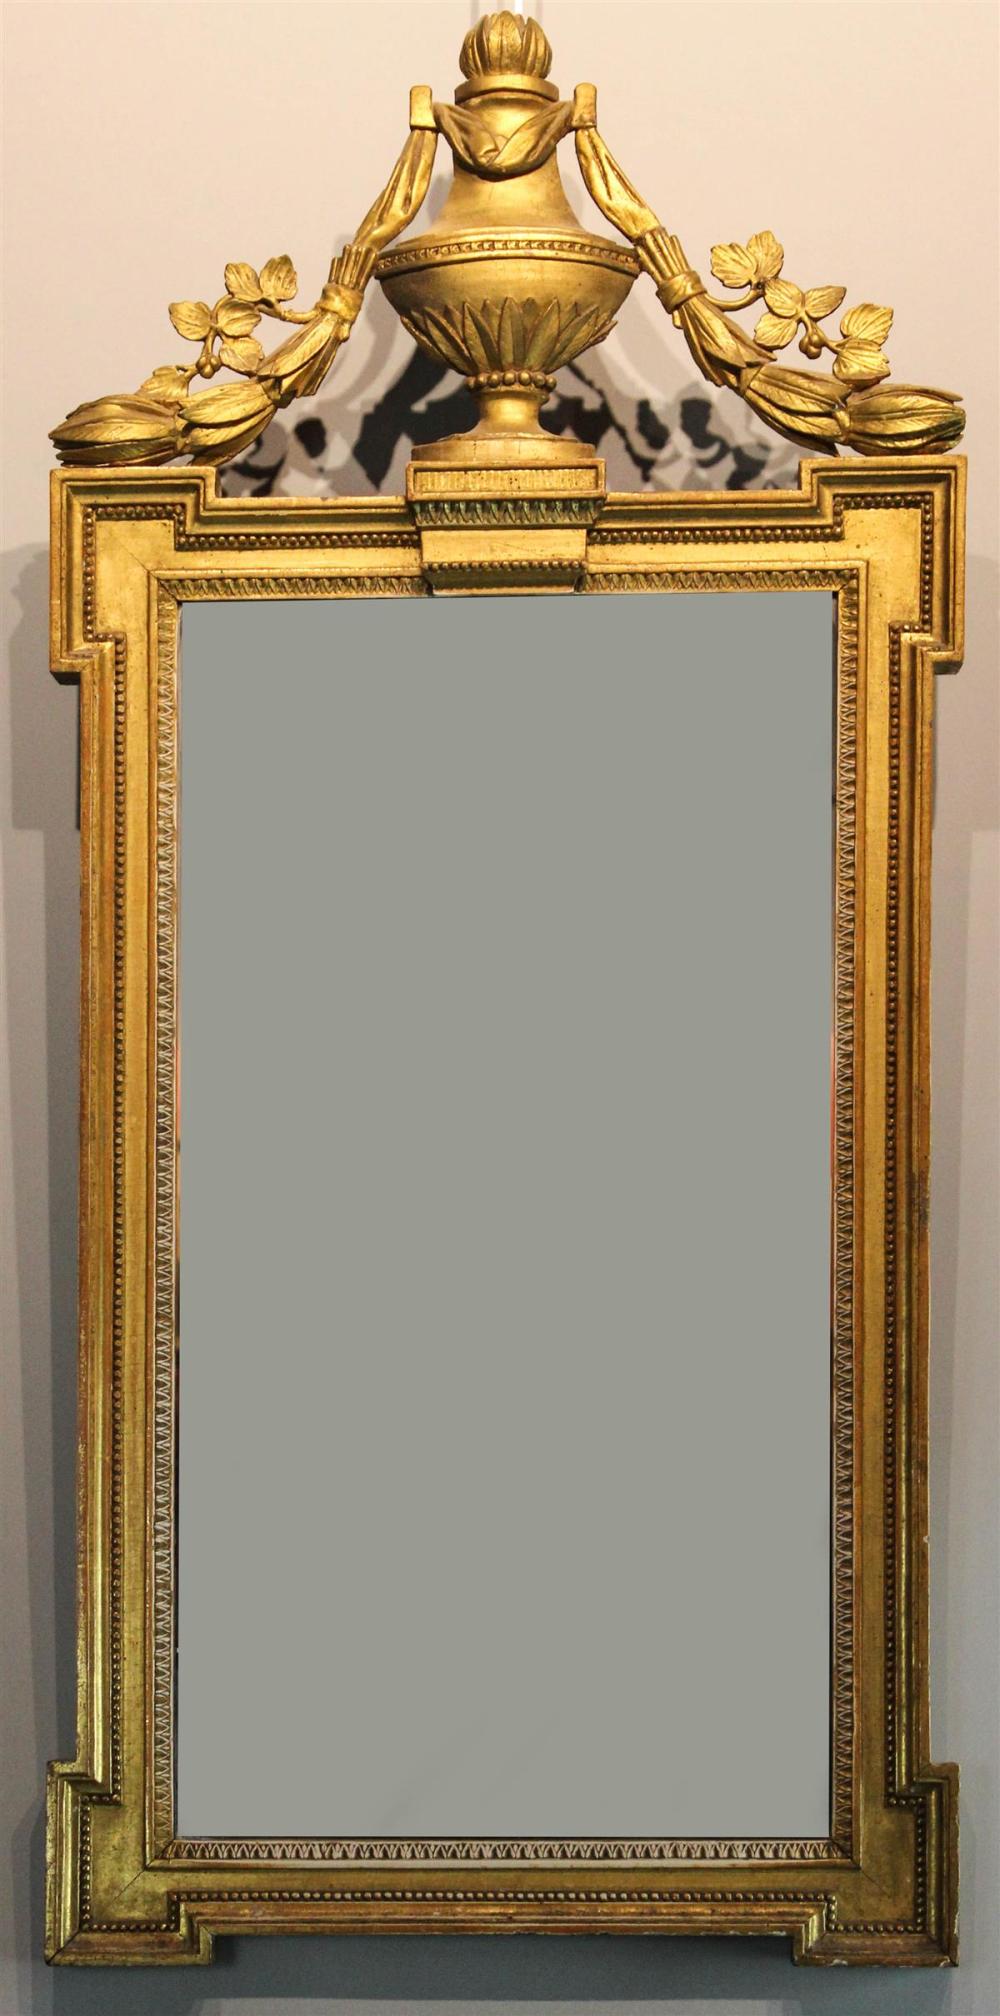 CHIPPENDALE STYLE GILTWOOD MIRRORCHIPPENDALE 313d06